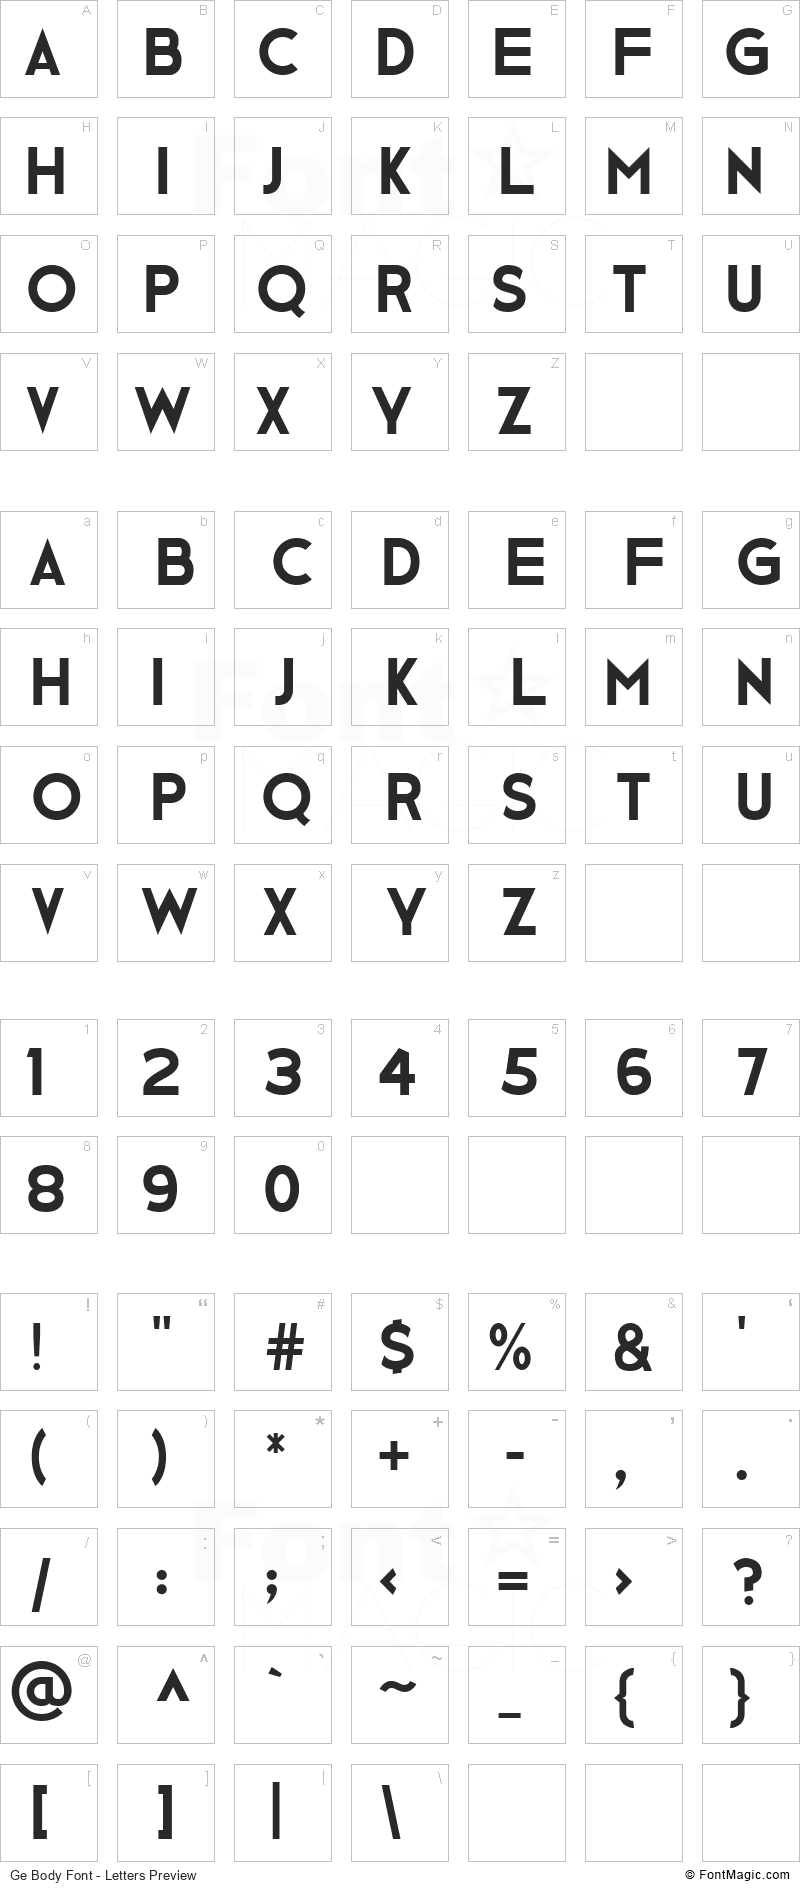 Ge Body Font - All Latters Preview Chart